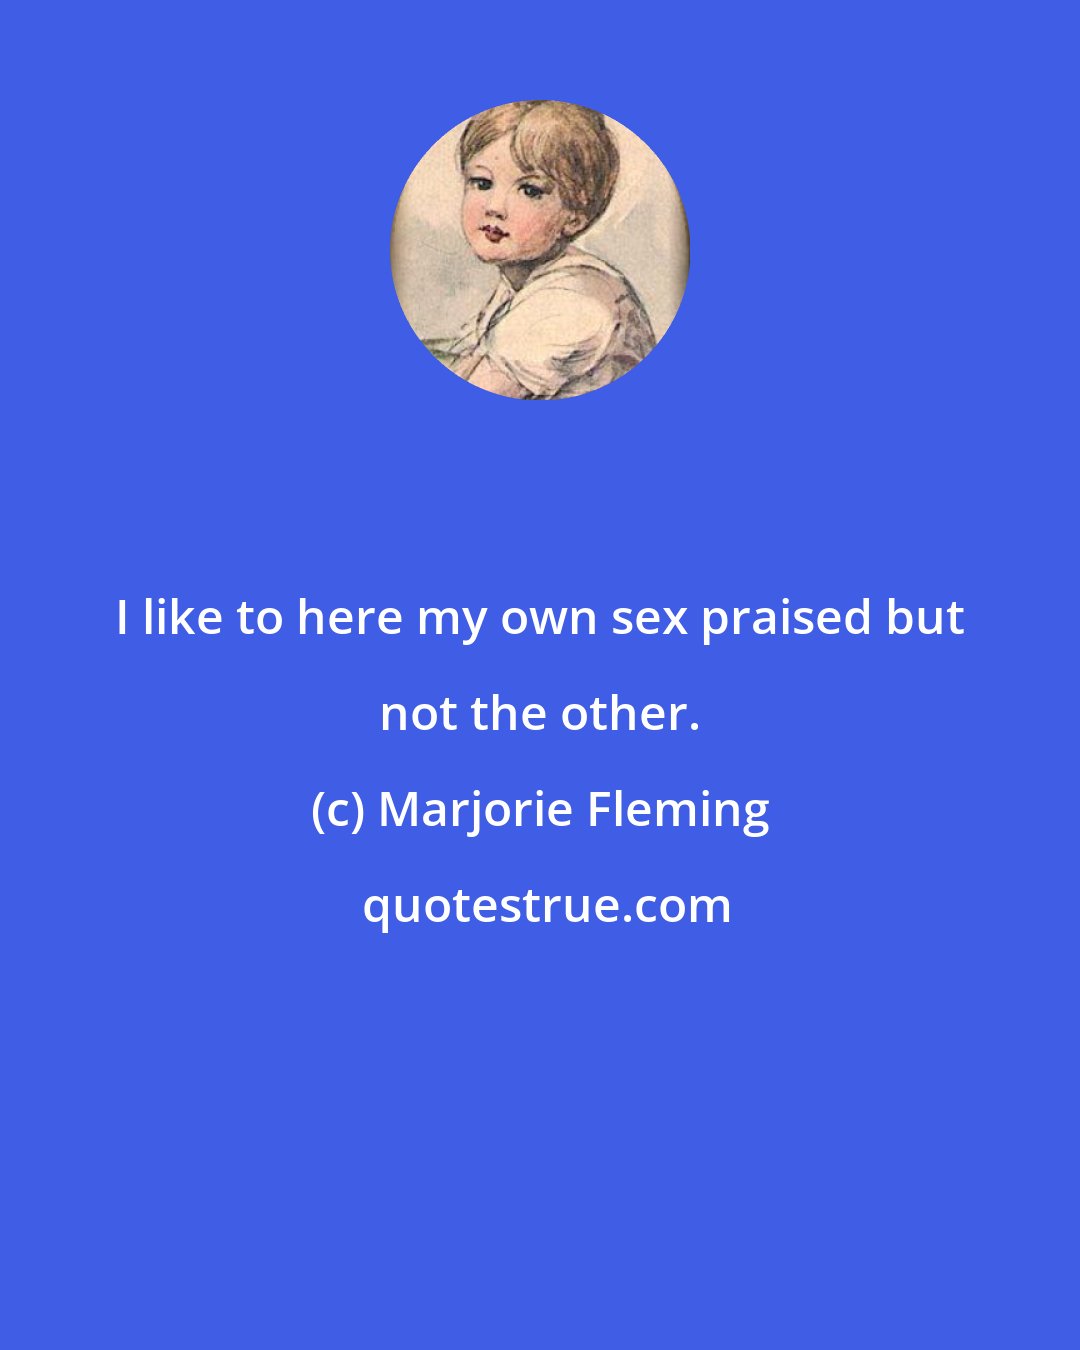 Marjorie Fleming: I like to here my own sex praised but not the other.